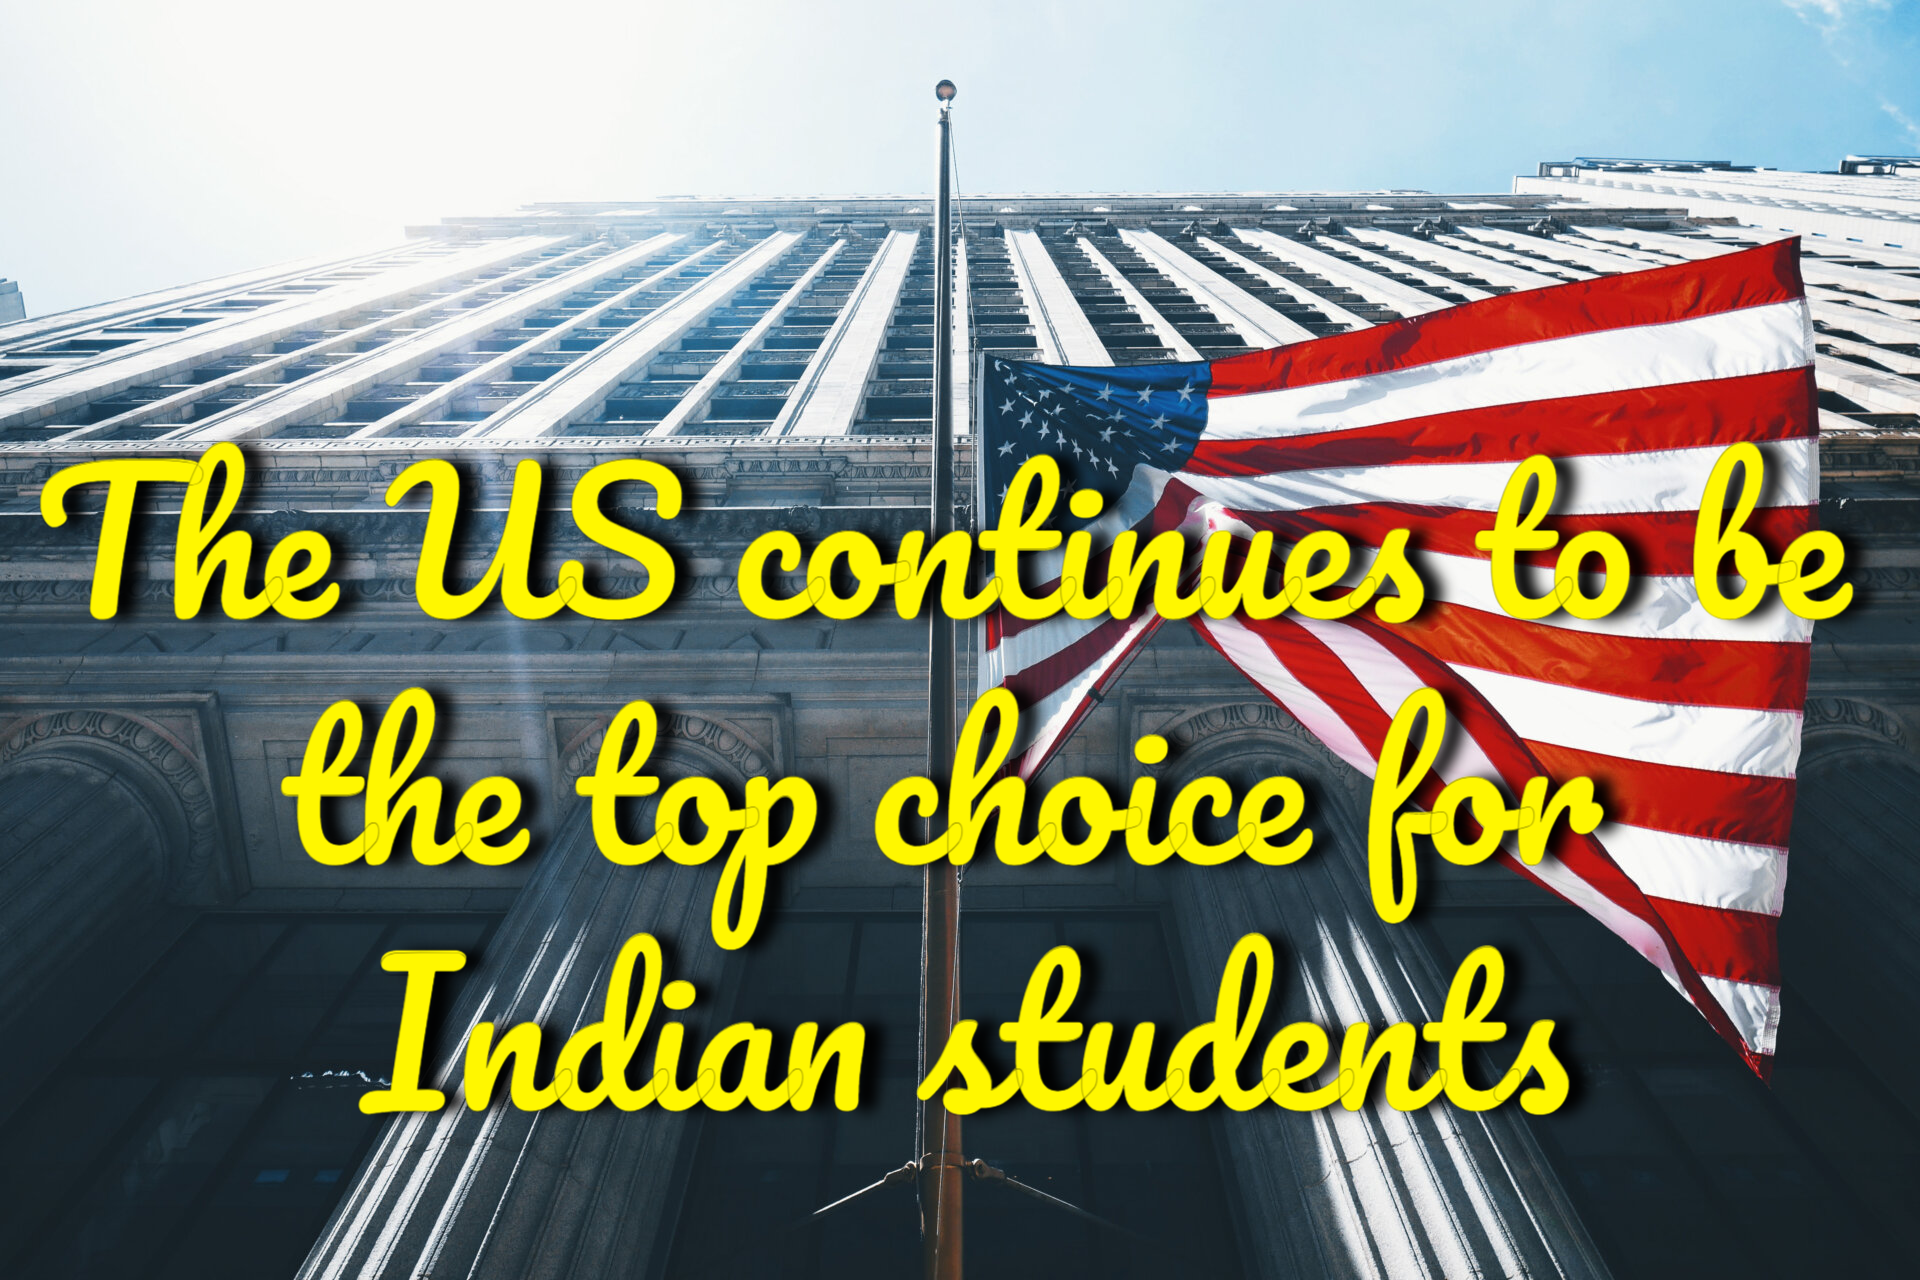 Students from India continue to choose the US as their top choice; the UK sees a marked increase